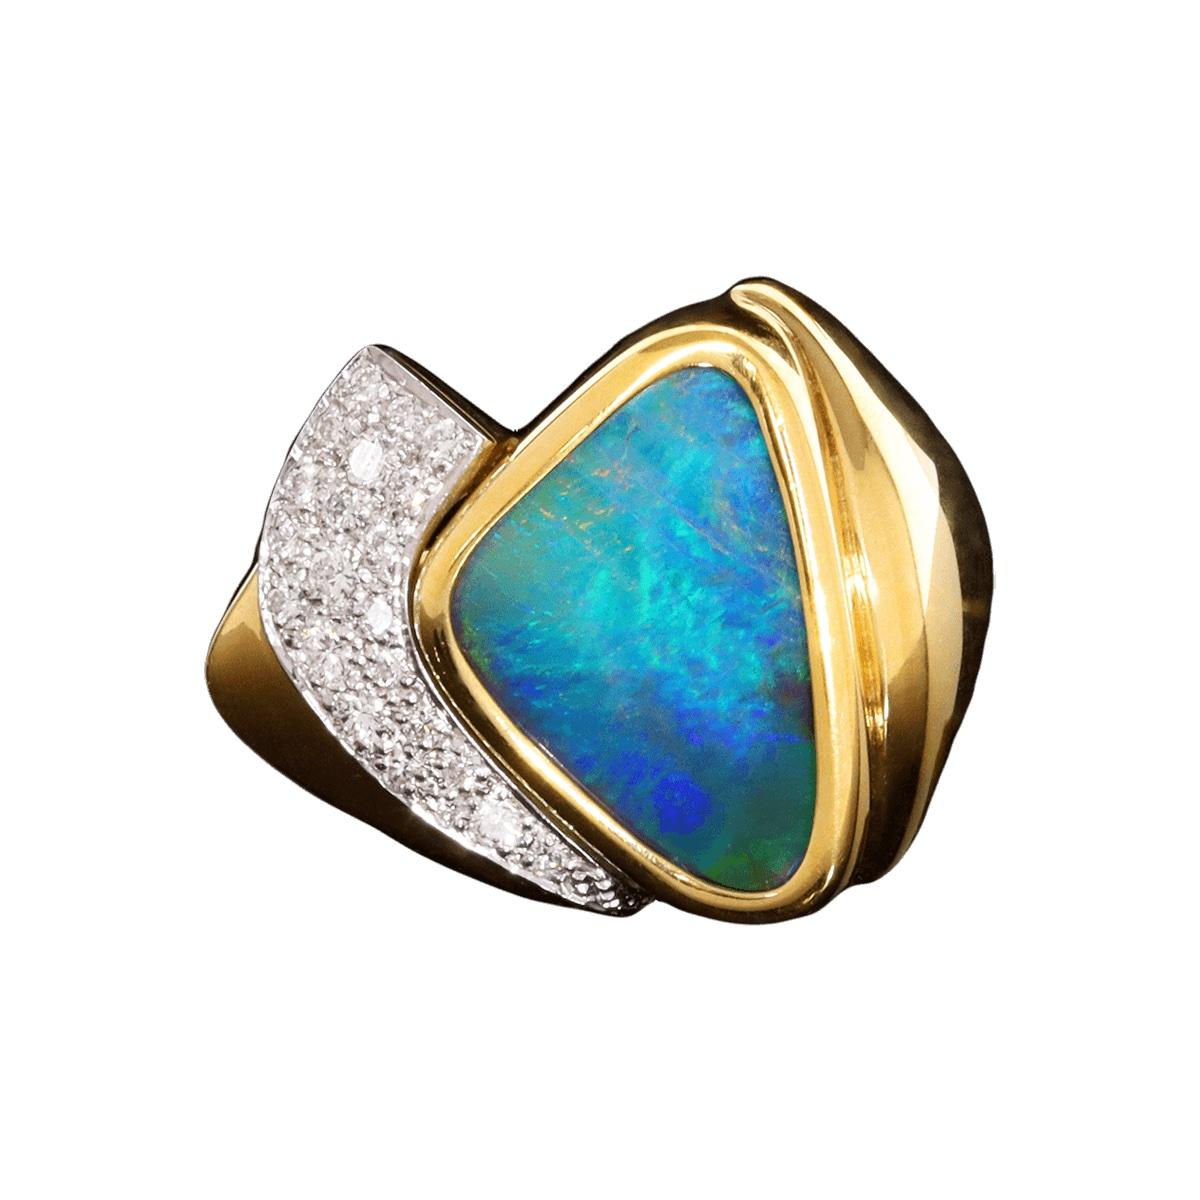 There is something truly magical about bright yellow in a gemstone, especially when it is this deep and vibrant. Mix that with the most sought-after oranges and reds, and the magic goes to an entirely new level. But this ring has even more to offer